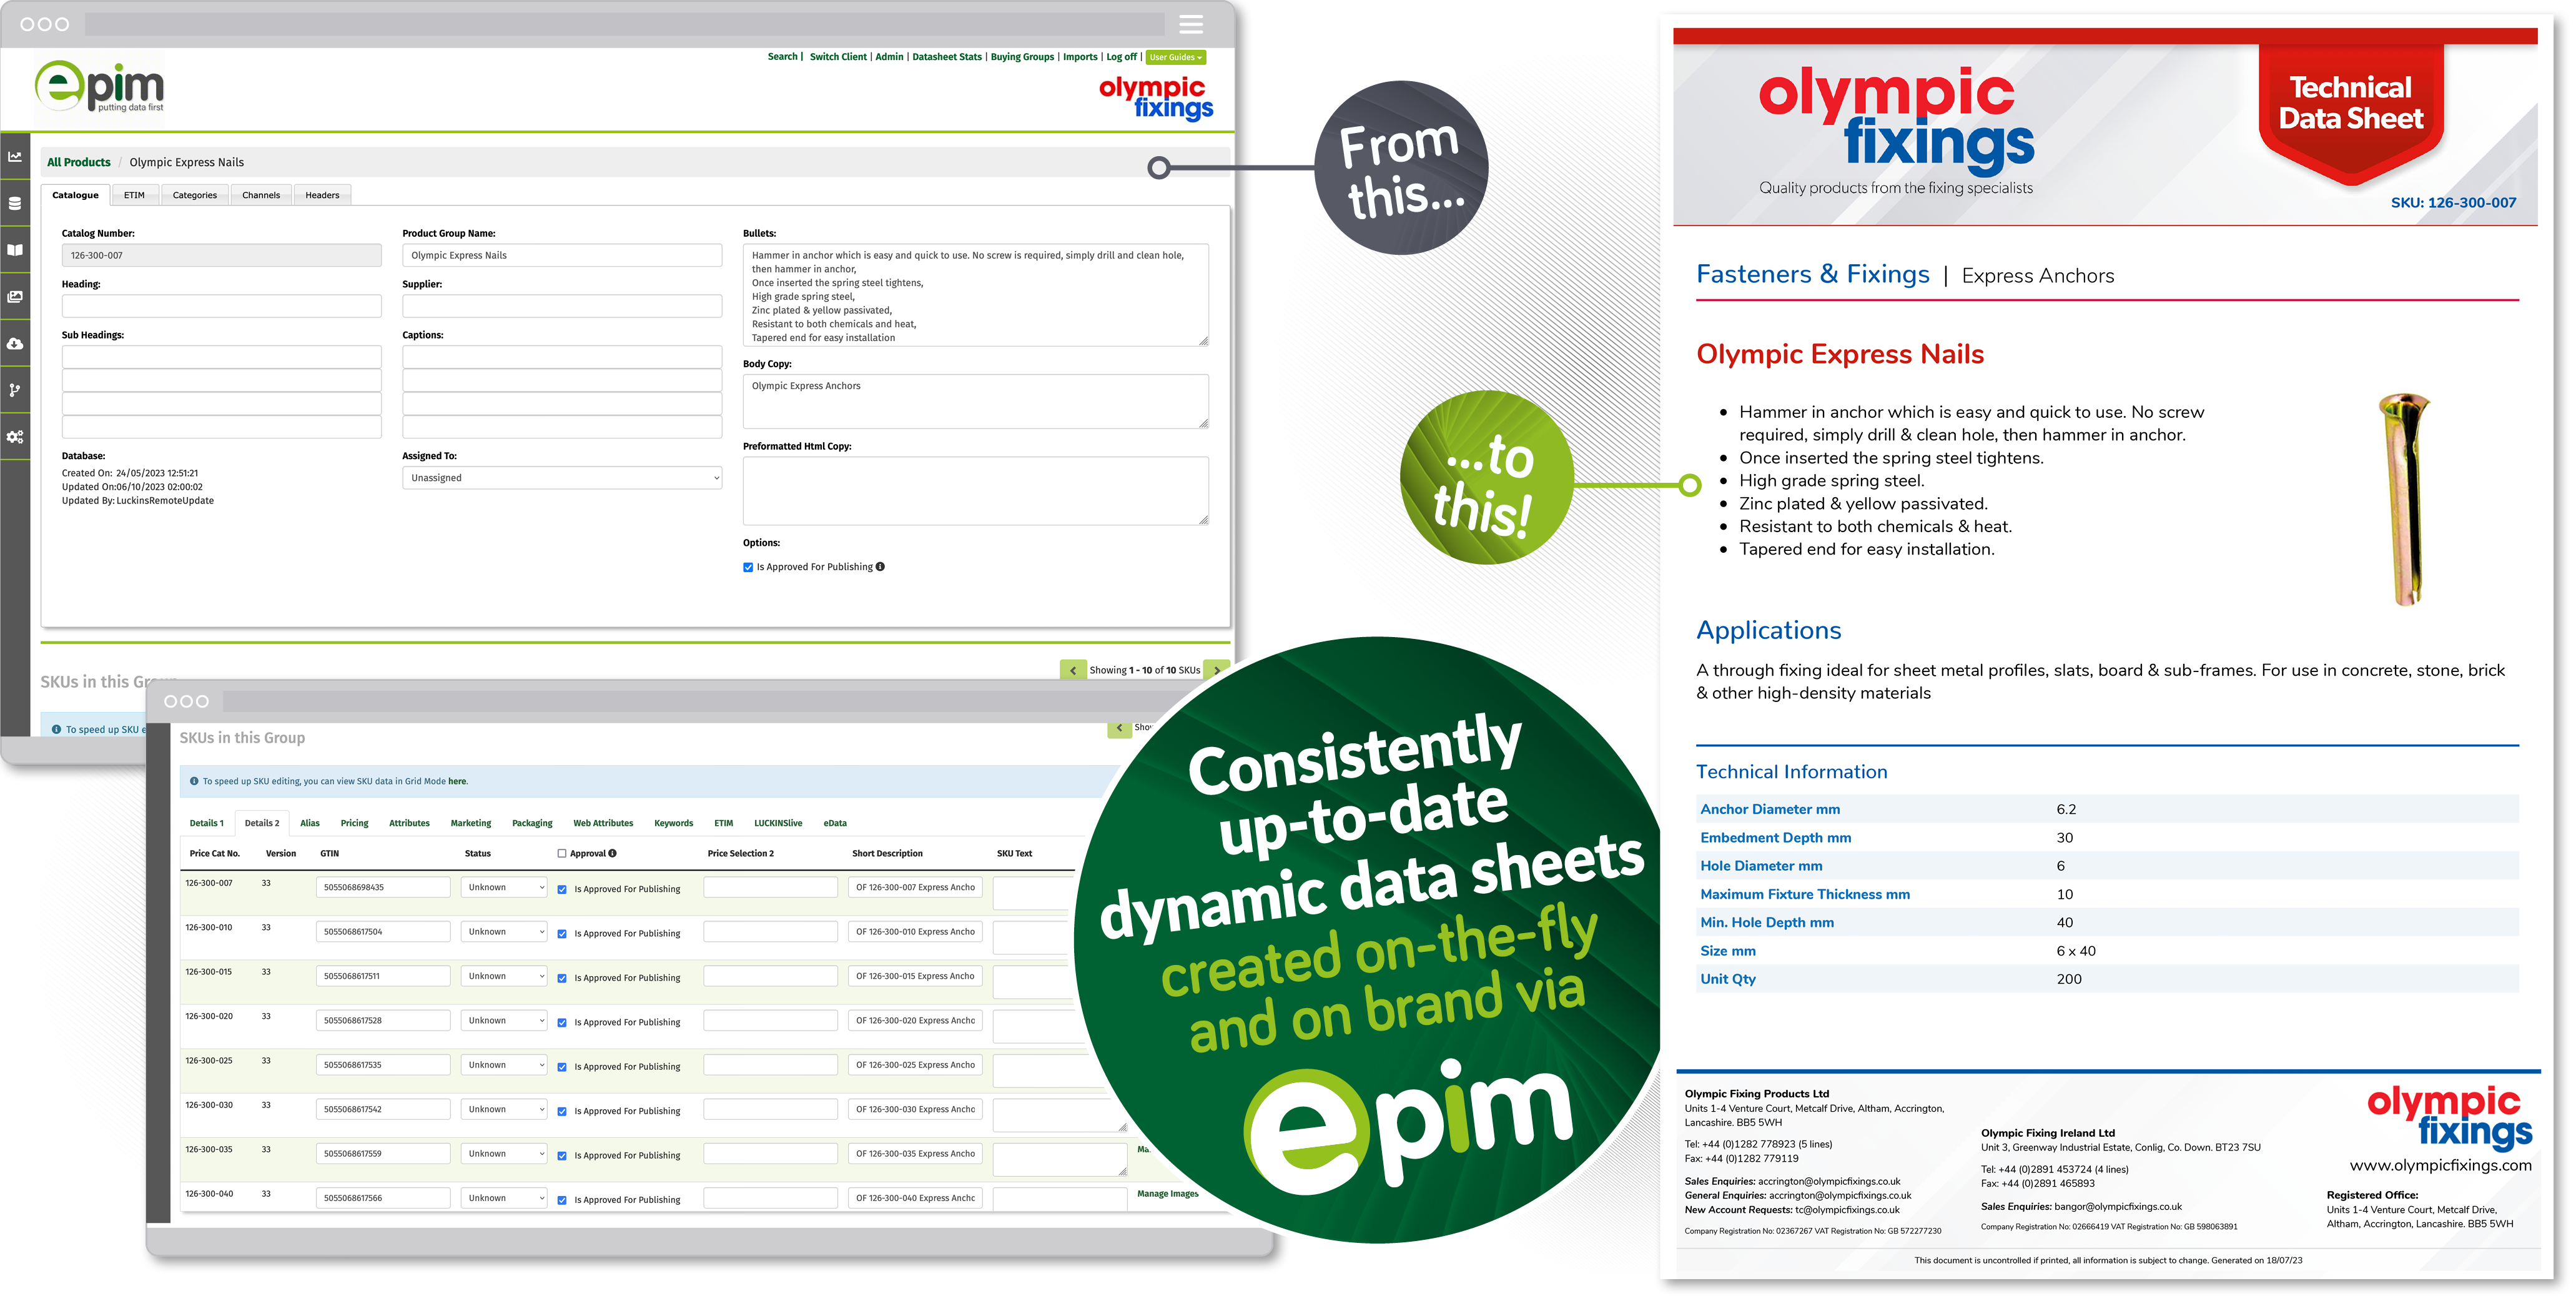 How data appears in e-Pim and how it looks generated as a dynamic data sheet using Olympic Fixings custom designed template.